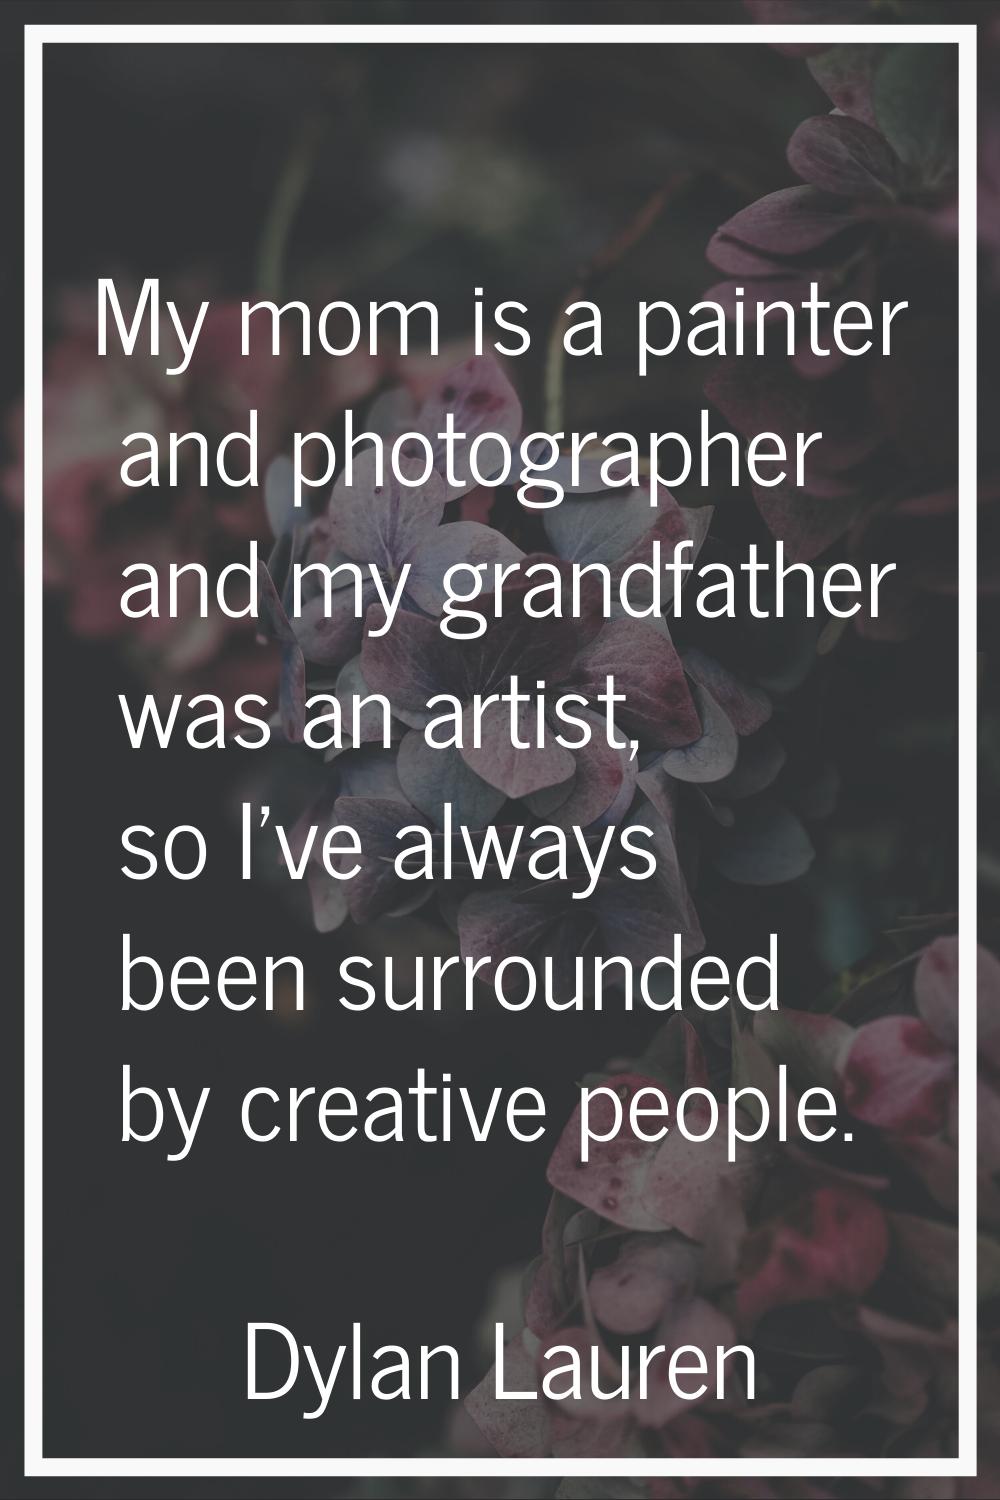 My mom is a painter and photographer and my grandfather was an artist, so I've always been surround